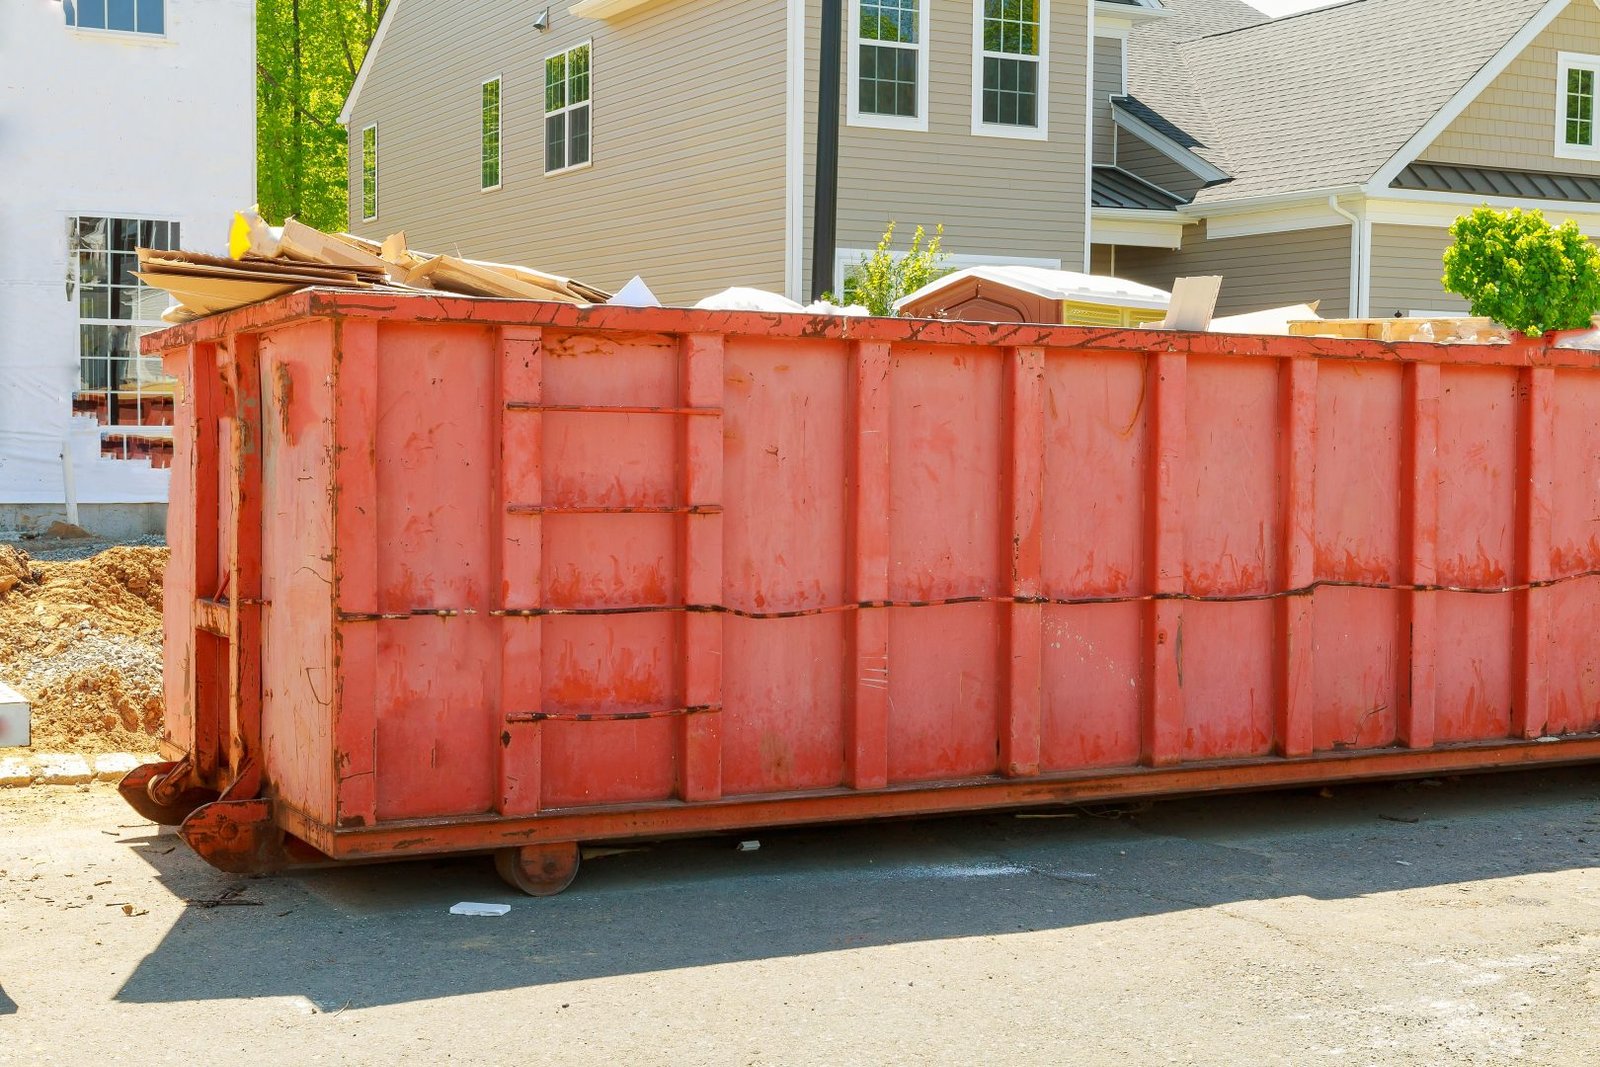 Introduction to Dumpster Rental in Miami, FL: Dumpster Sizes and Dimensions in Miami, FL